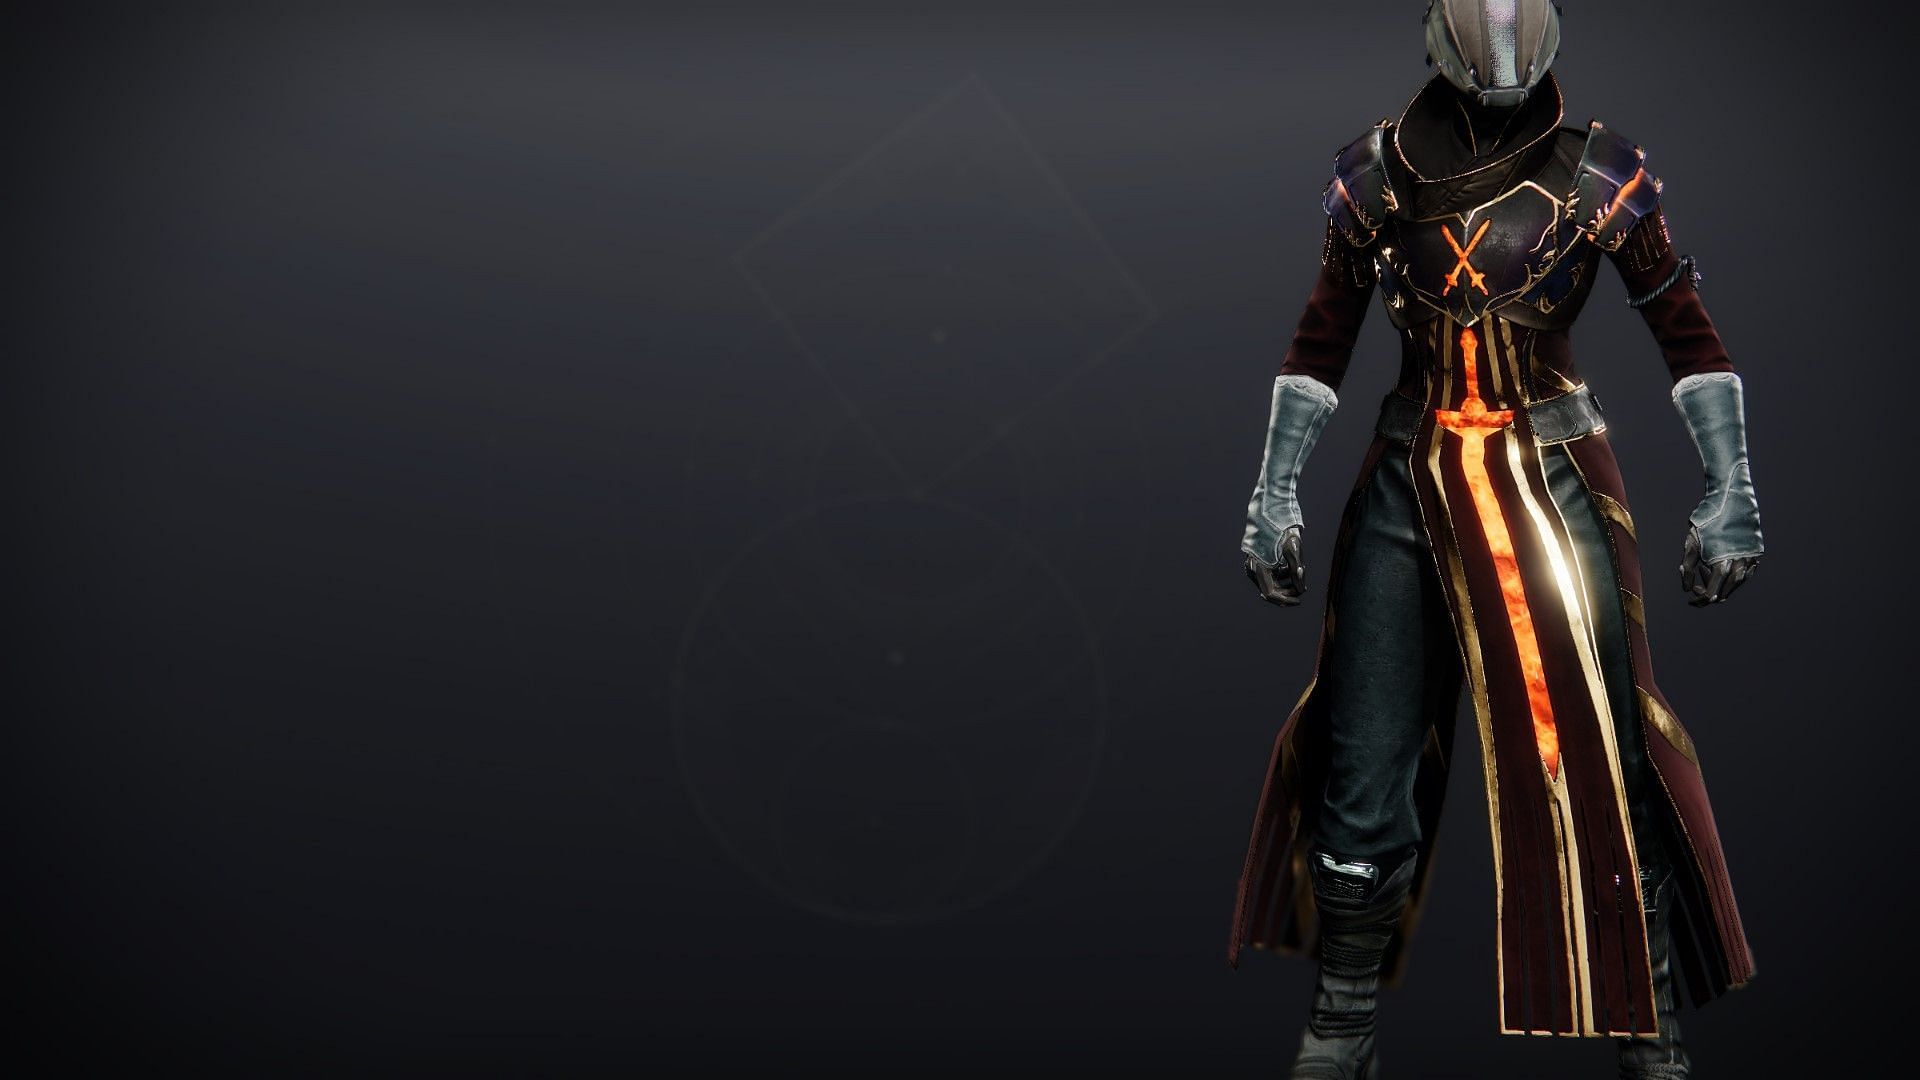 The Dawn Singer Robes (Image via Bungie)